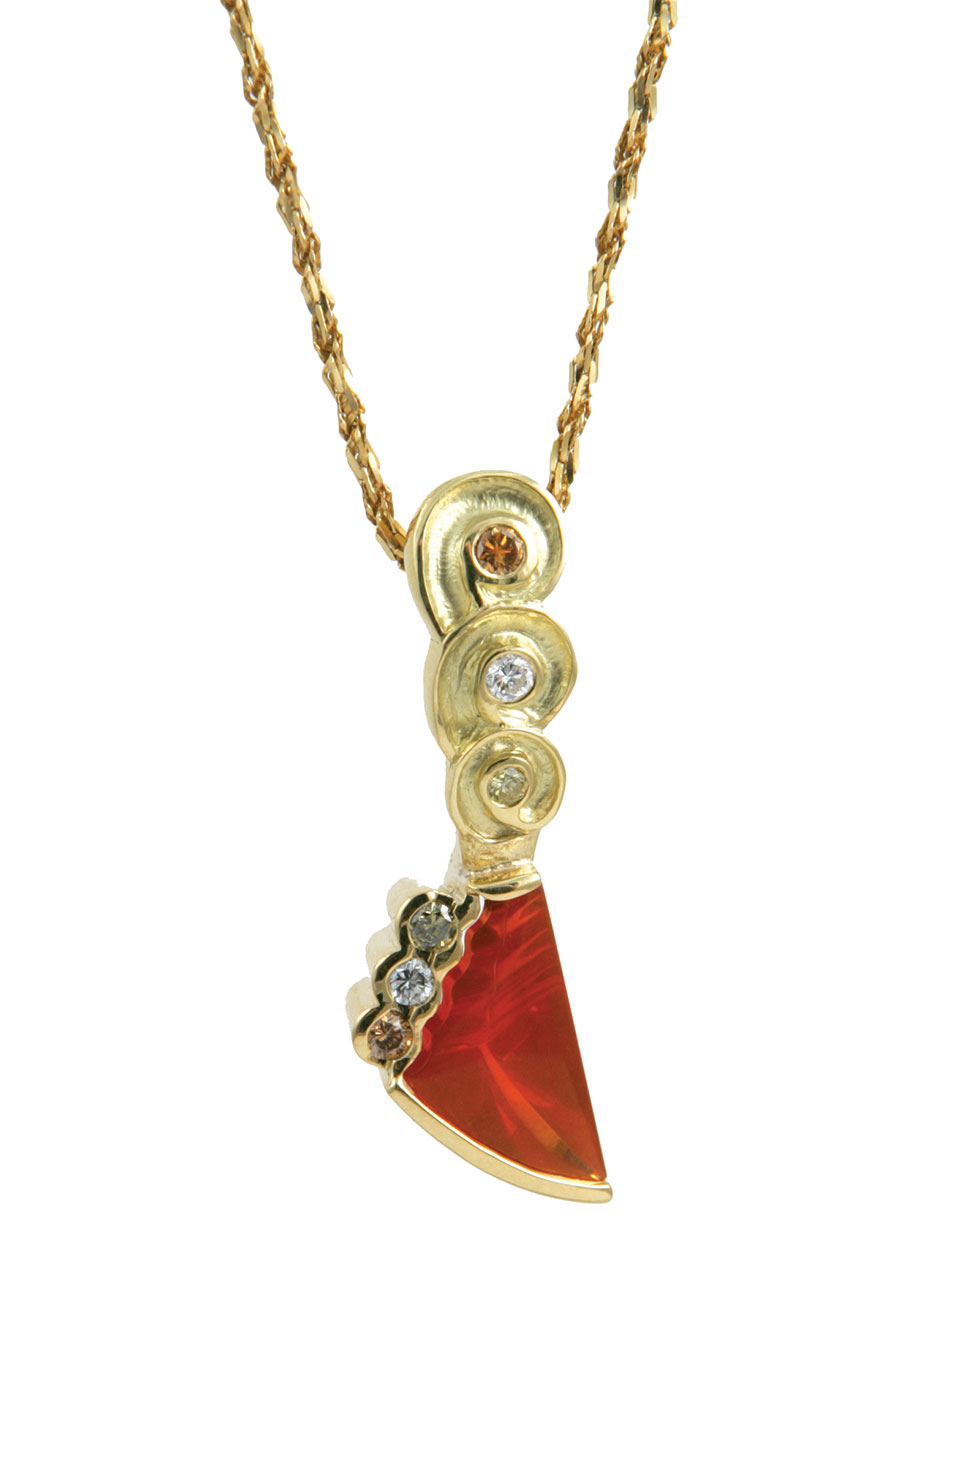 Vickie Riggs Designs: Fire Opal Pendant